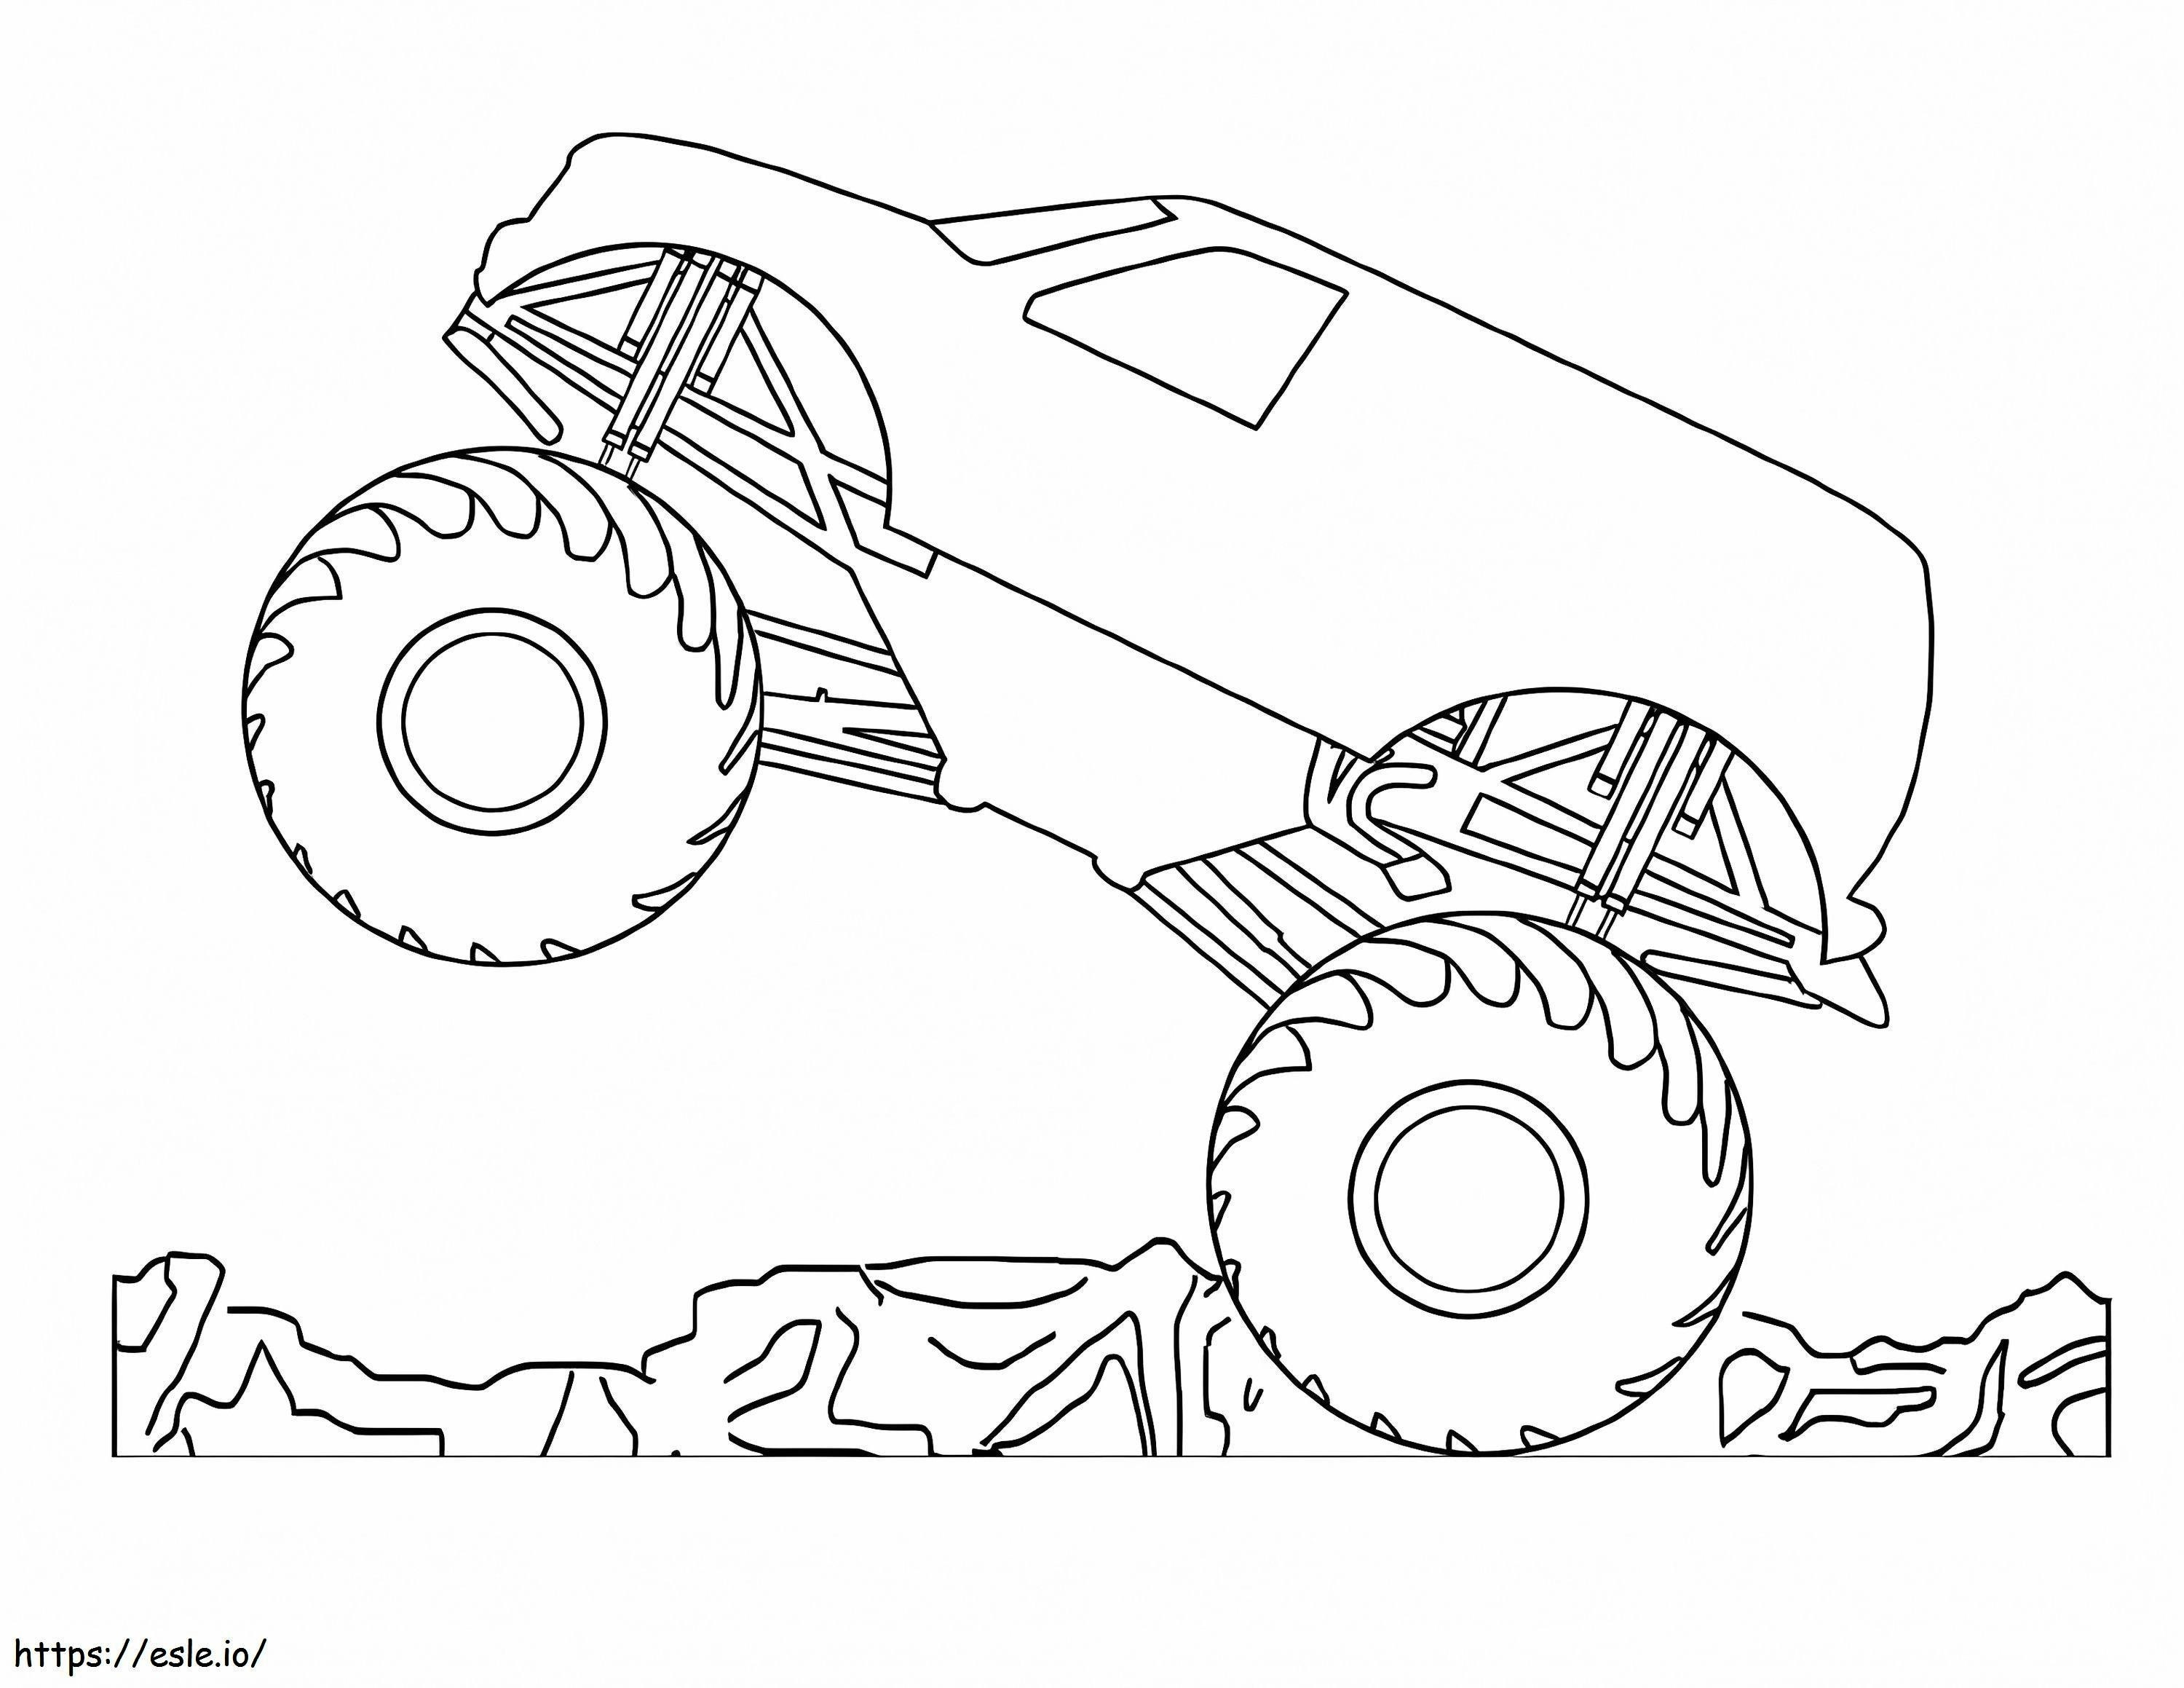 Simple Monster Truck coloring page